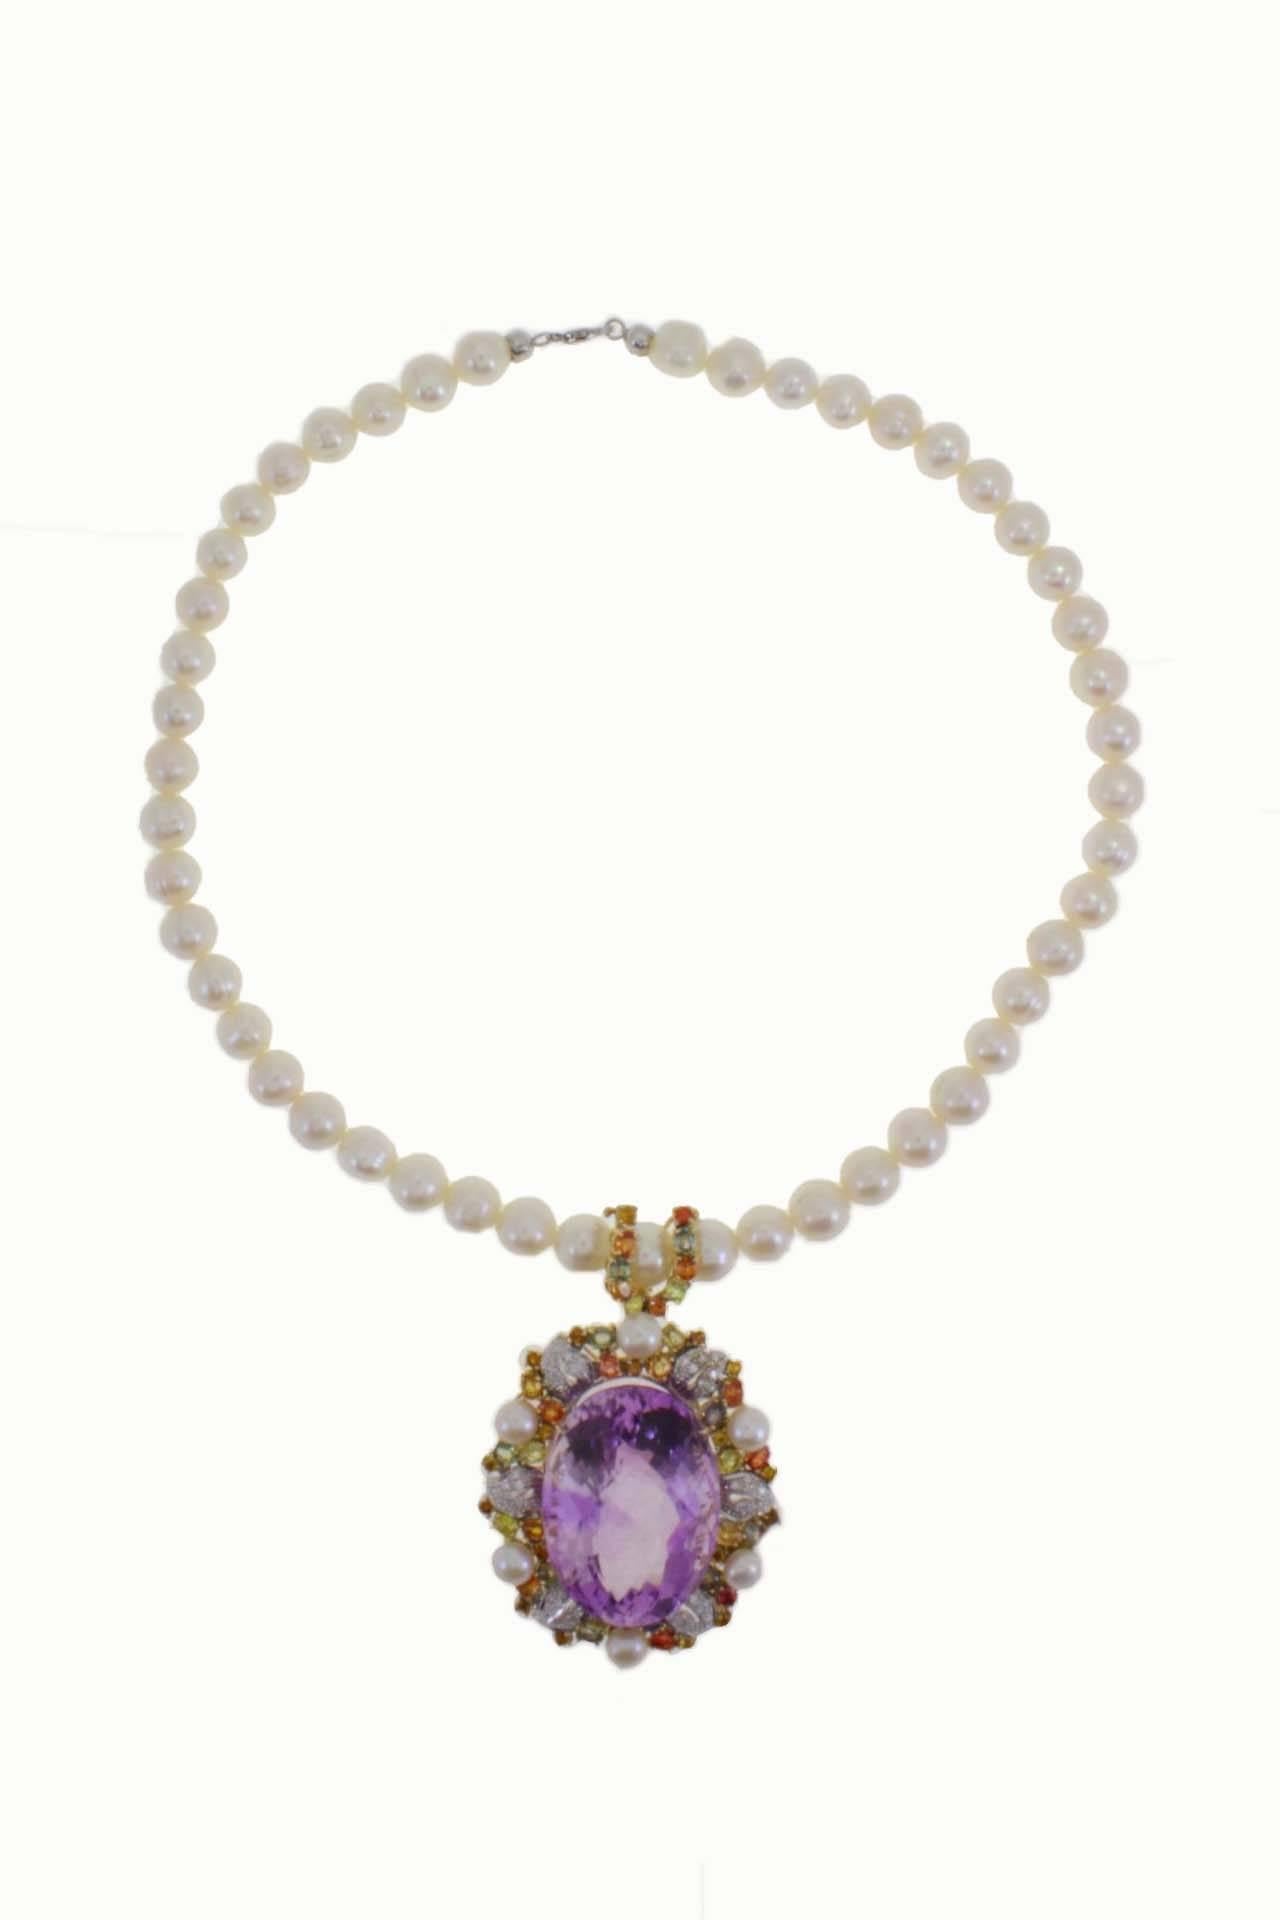 Beaded necklace with a oval amethyst pendant in 14Kt white gold surrounded by diamonds and multicolor sapphires. The clasp in 18Kt white gold.

diamonds and multicolor sapphires(98.62Kt)
pearls  diameter between 7/8mm (47gr) 
tot weight